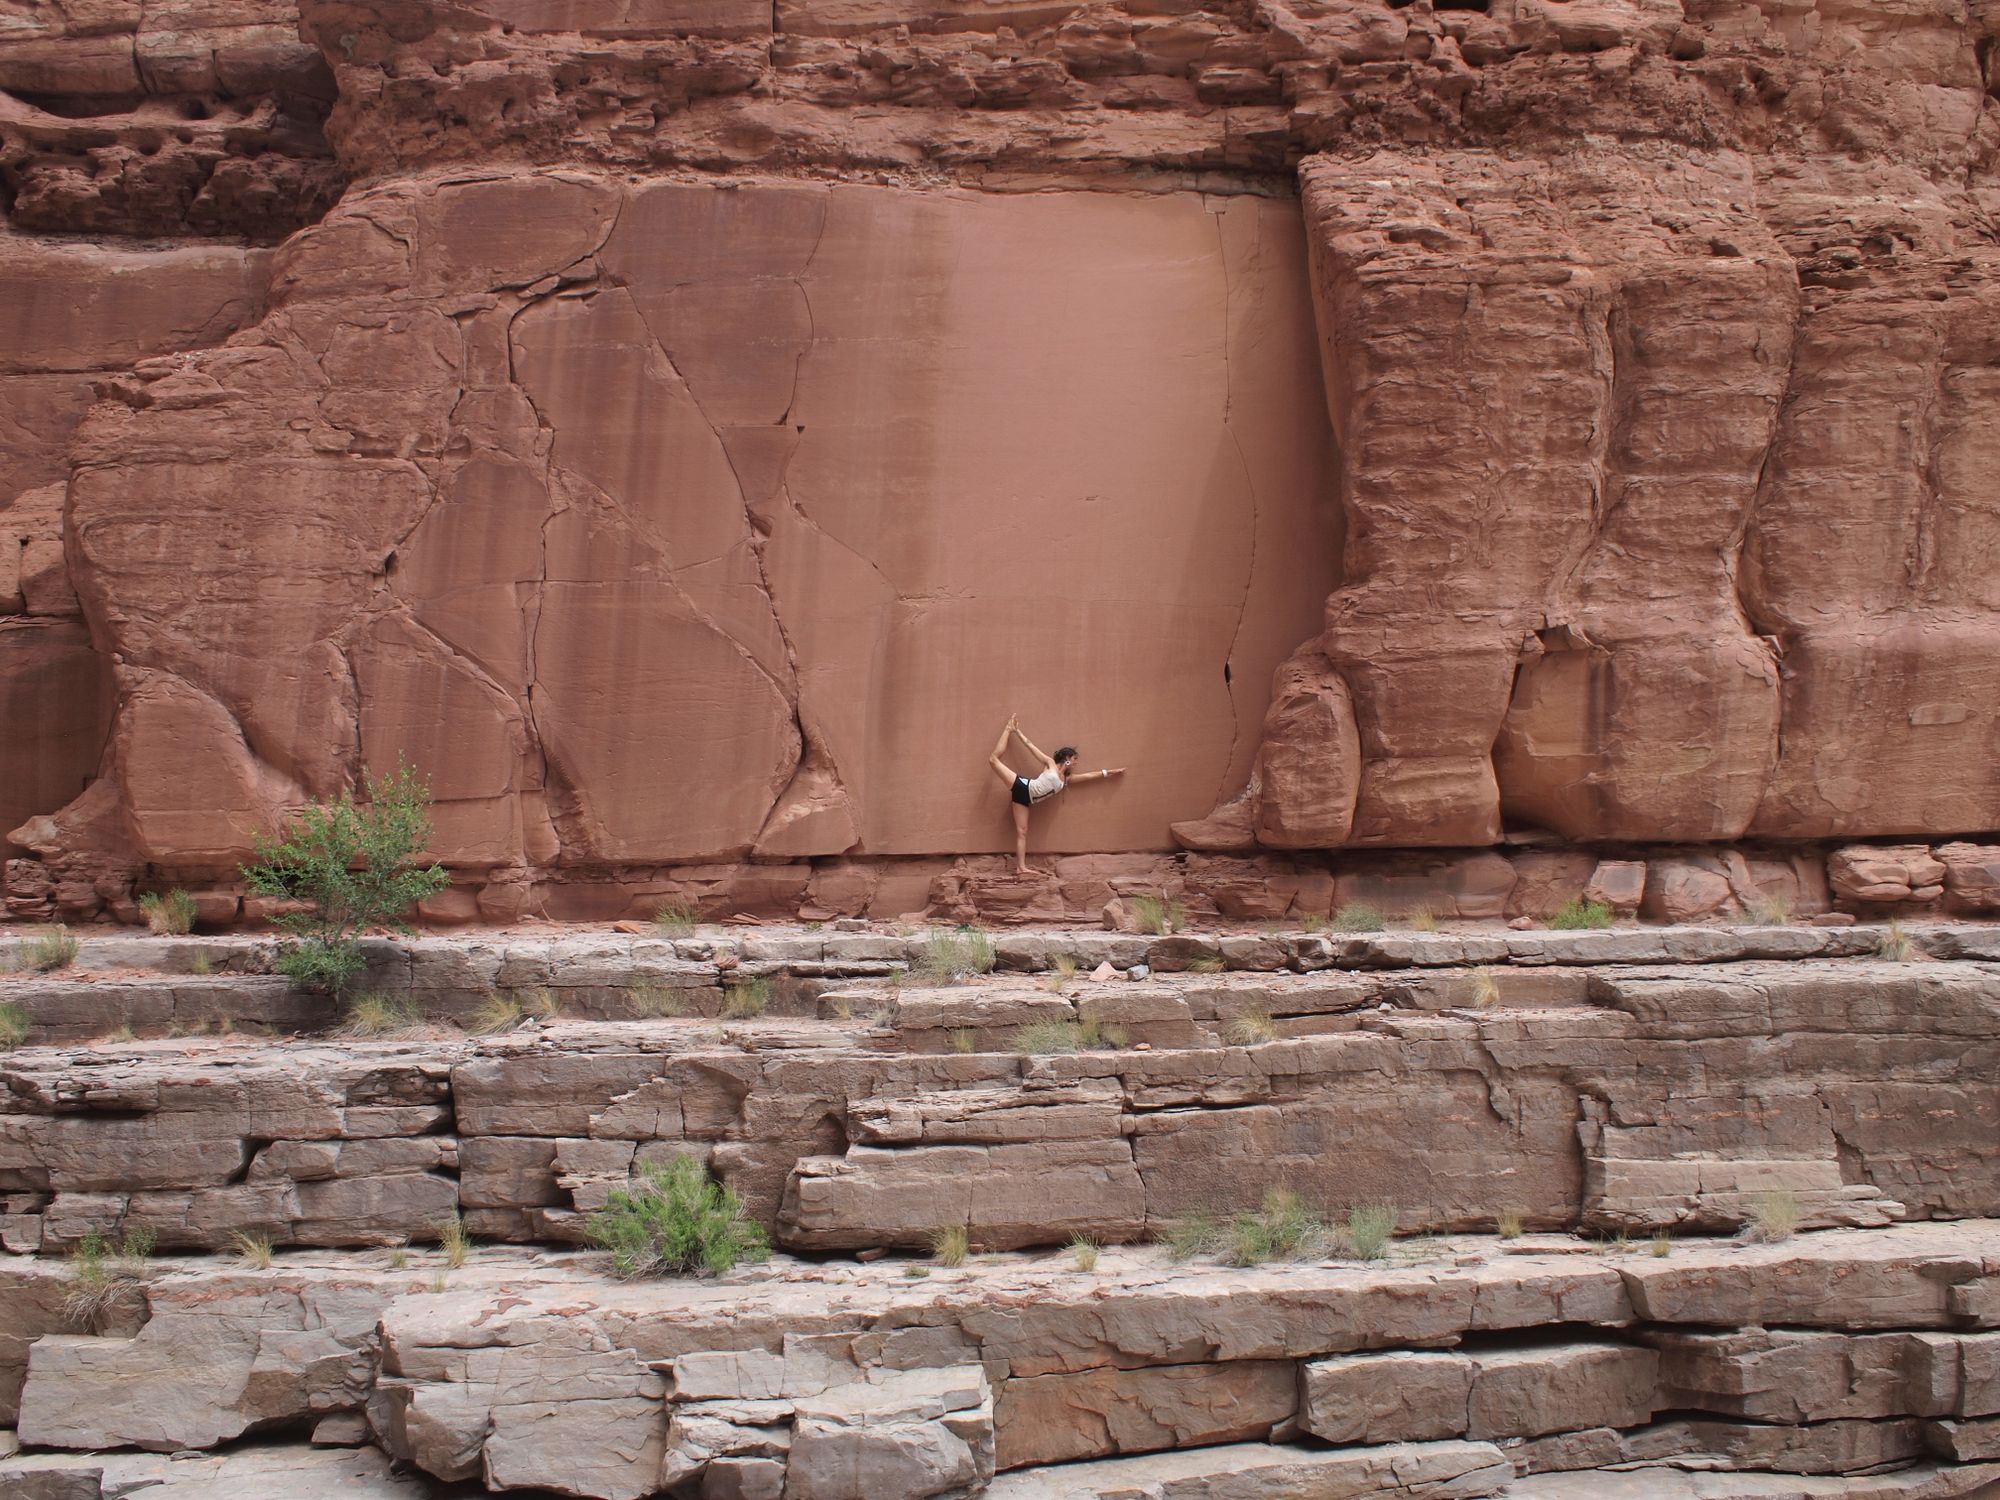 Woman doing yoga against against a red sandstone canyon wall